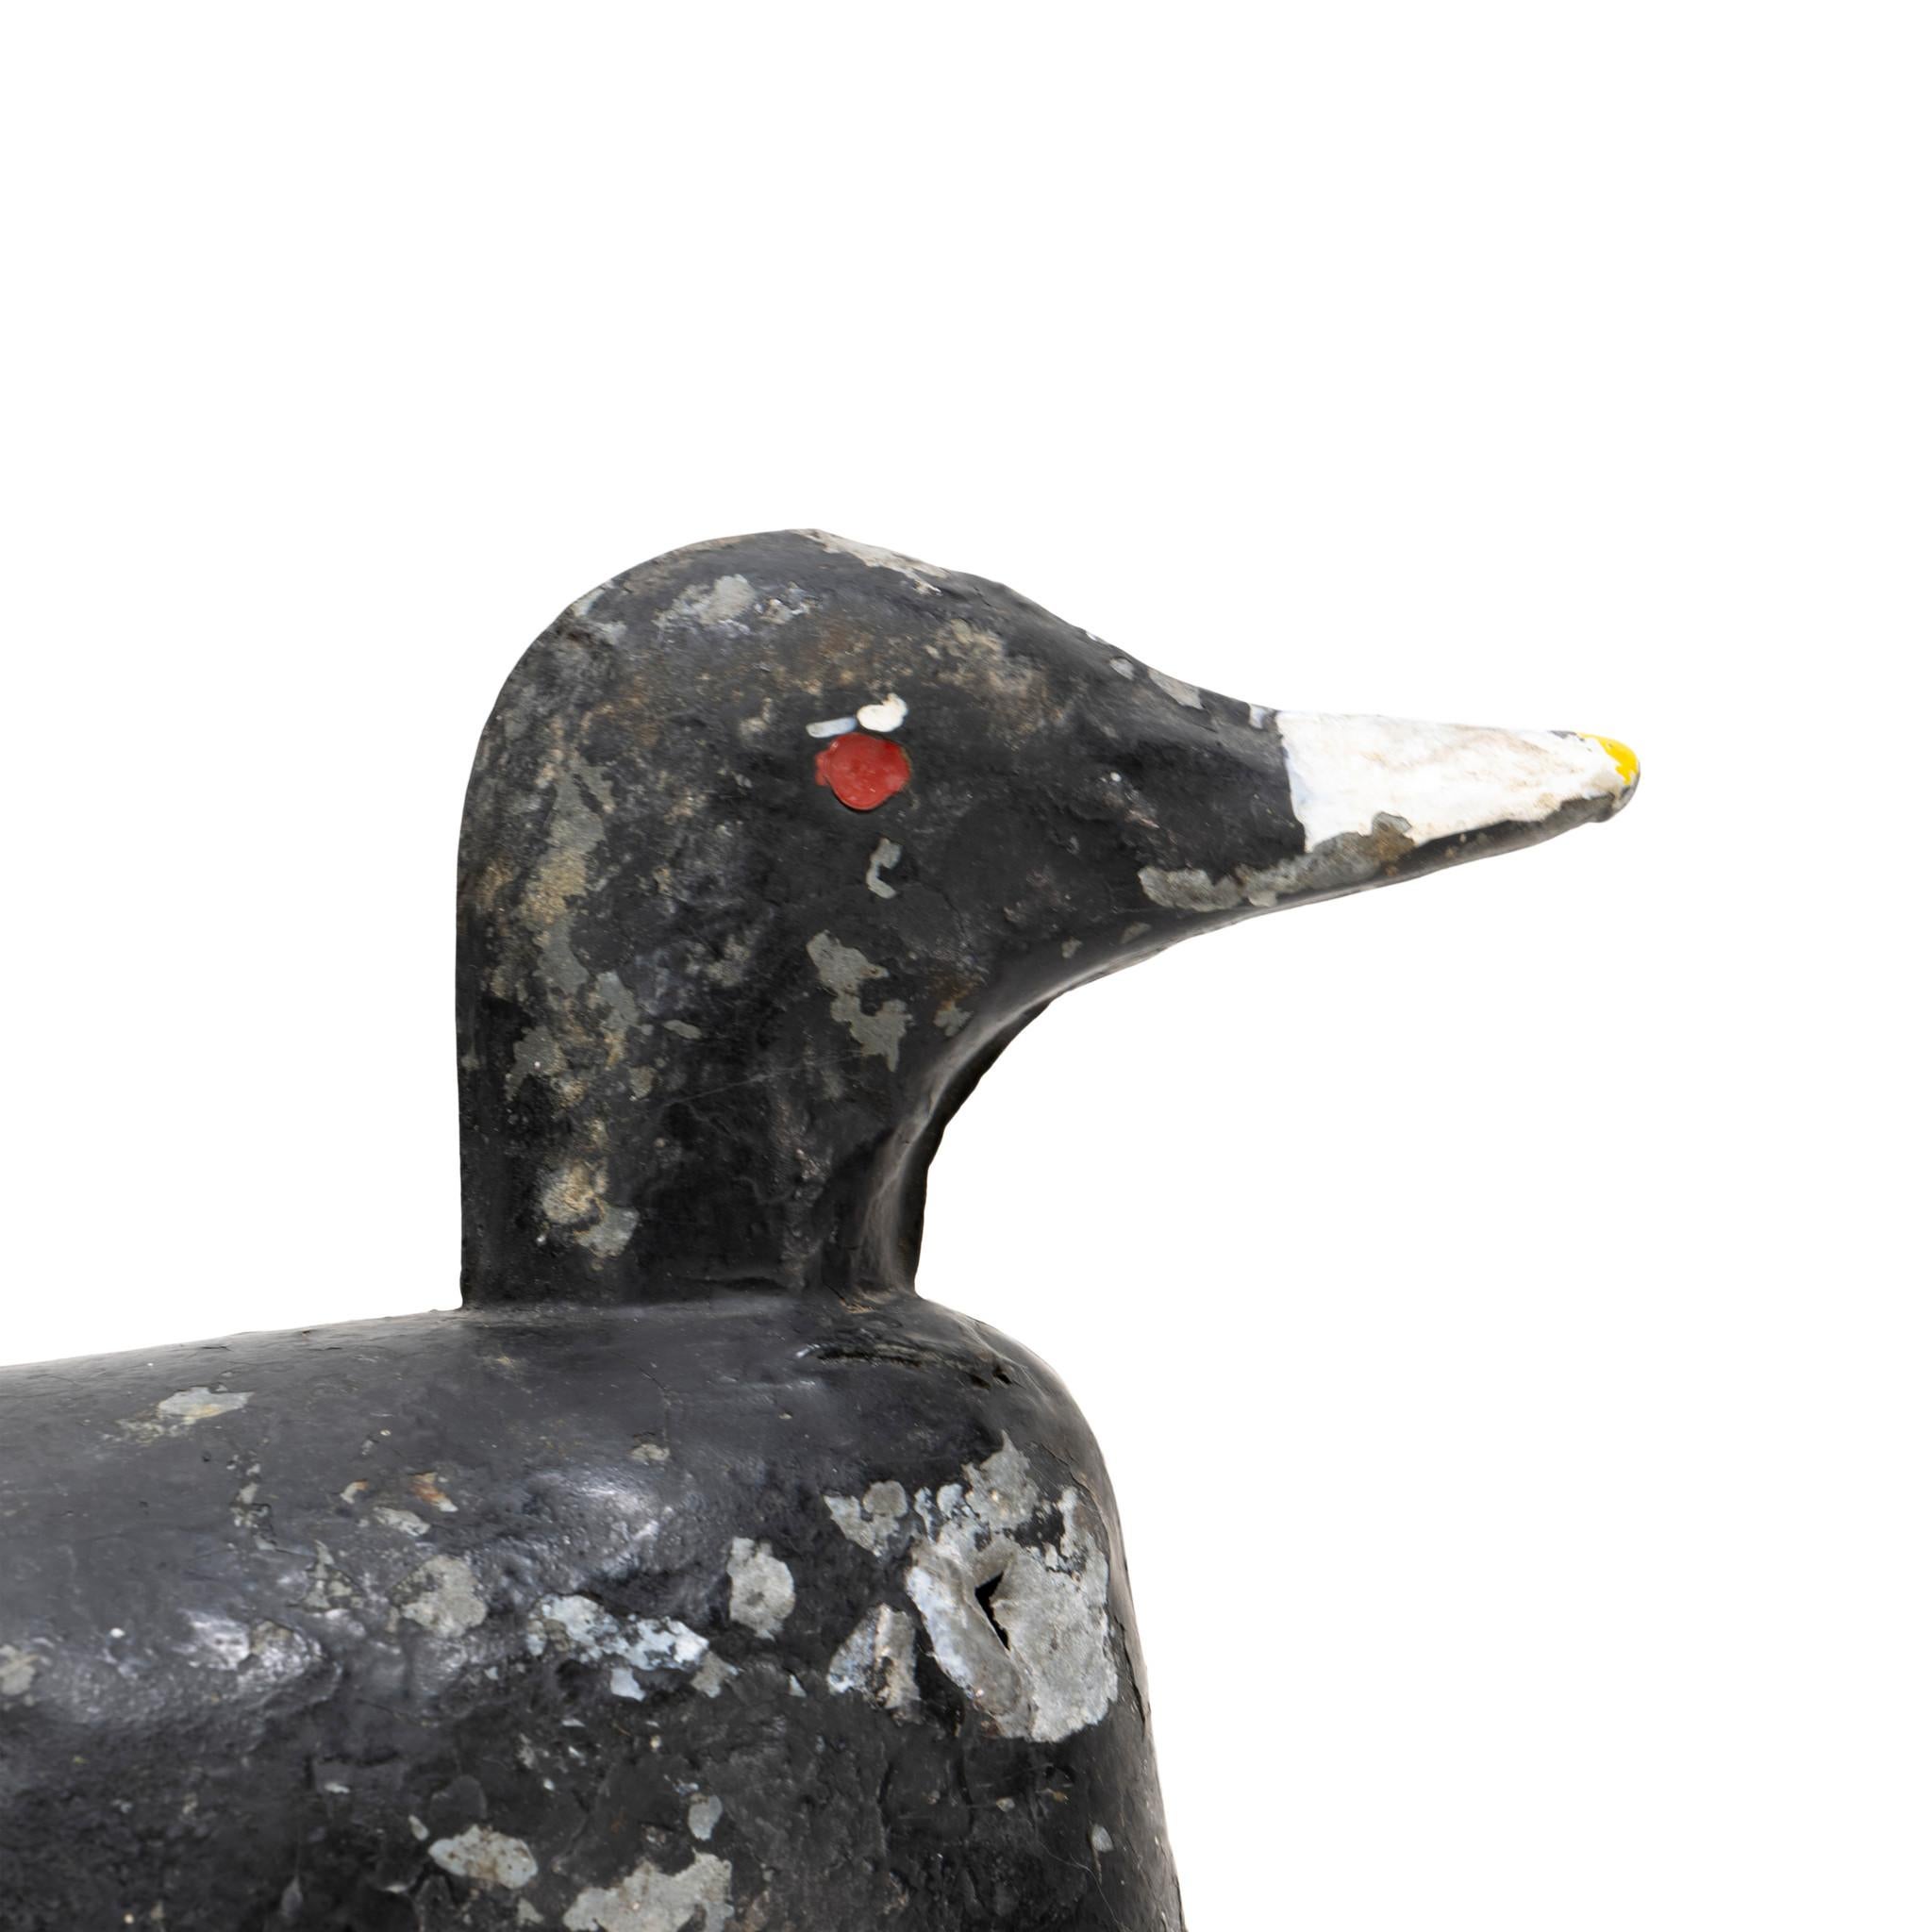 coot decoys for sale